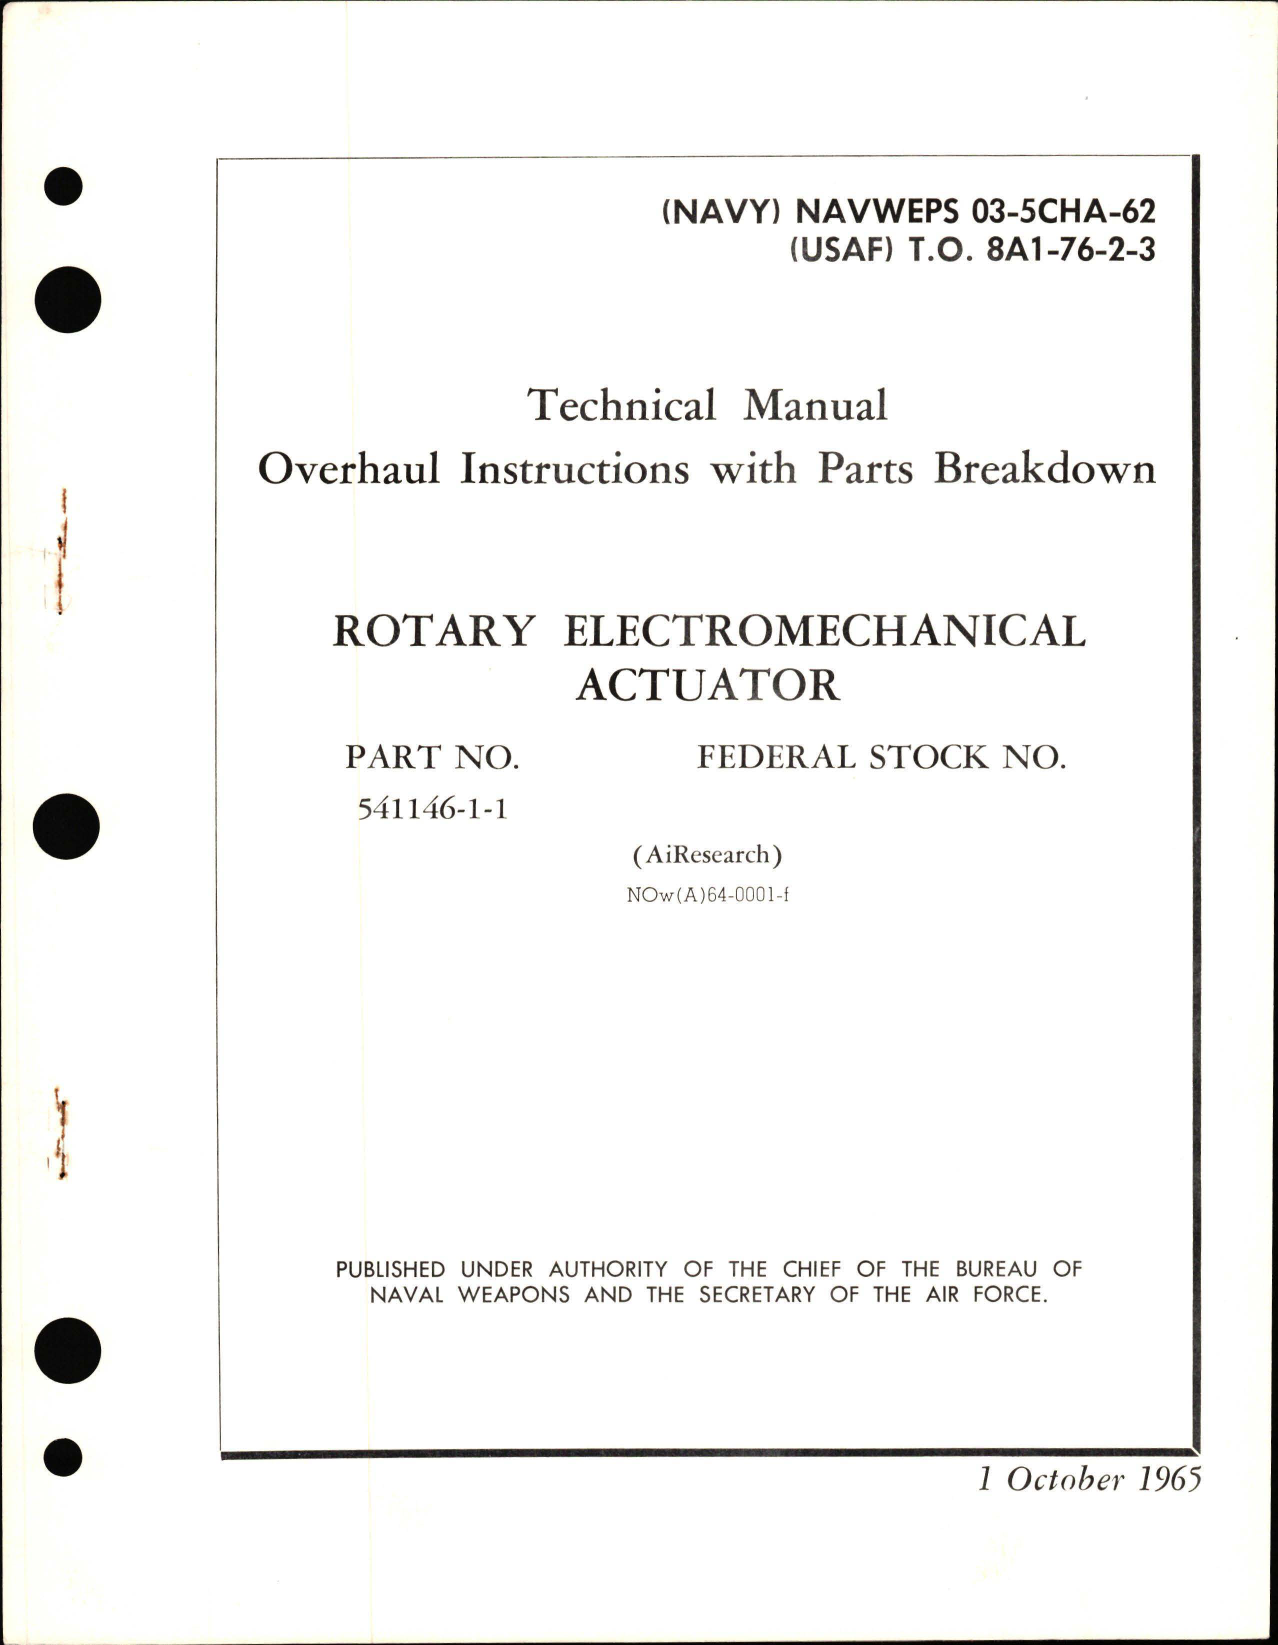 Sample page 1 from AirCorps Library document: Overhaul Instructions with Parts Breakdown for  Rotary Electromechanical Actuator - Part 541146-1-1